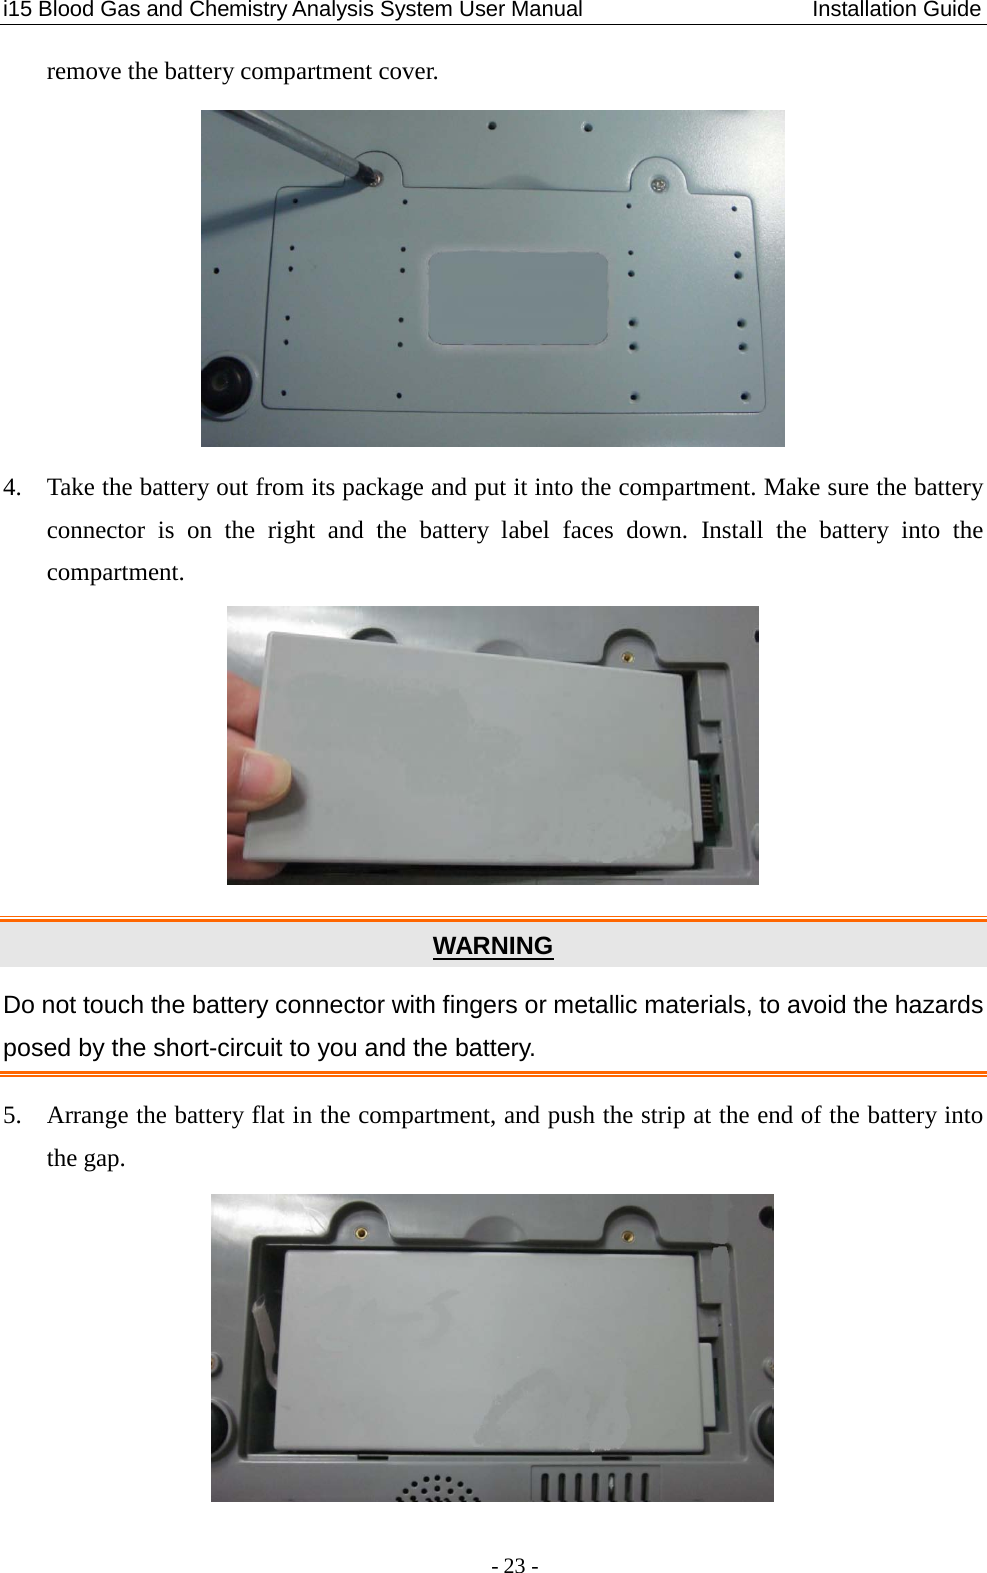 i15 Blood Gas and Chemistry Analysis System User Manual                     Installation Guide - 23 - remove the battery compartment cover.  4. Take the battery out from its package and put it into the compartment. Make sure the battery connector is on the right  and the battery label faces down. Install the battery into the compartment.  WARNING Do not touch the battery connector with fingers or metallic materials, to avoid the hazards posed by the short-circuit to you and the battery. 5. Arrange the battery flat in the compartment, and push the strip at the end of the battery into the gap.  